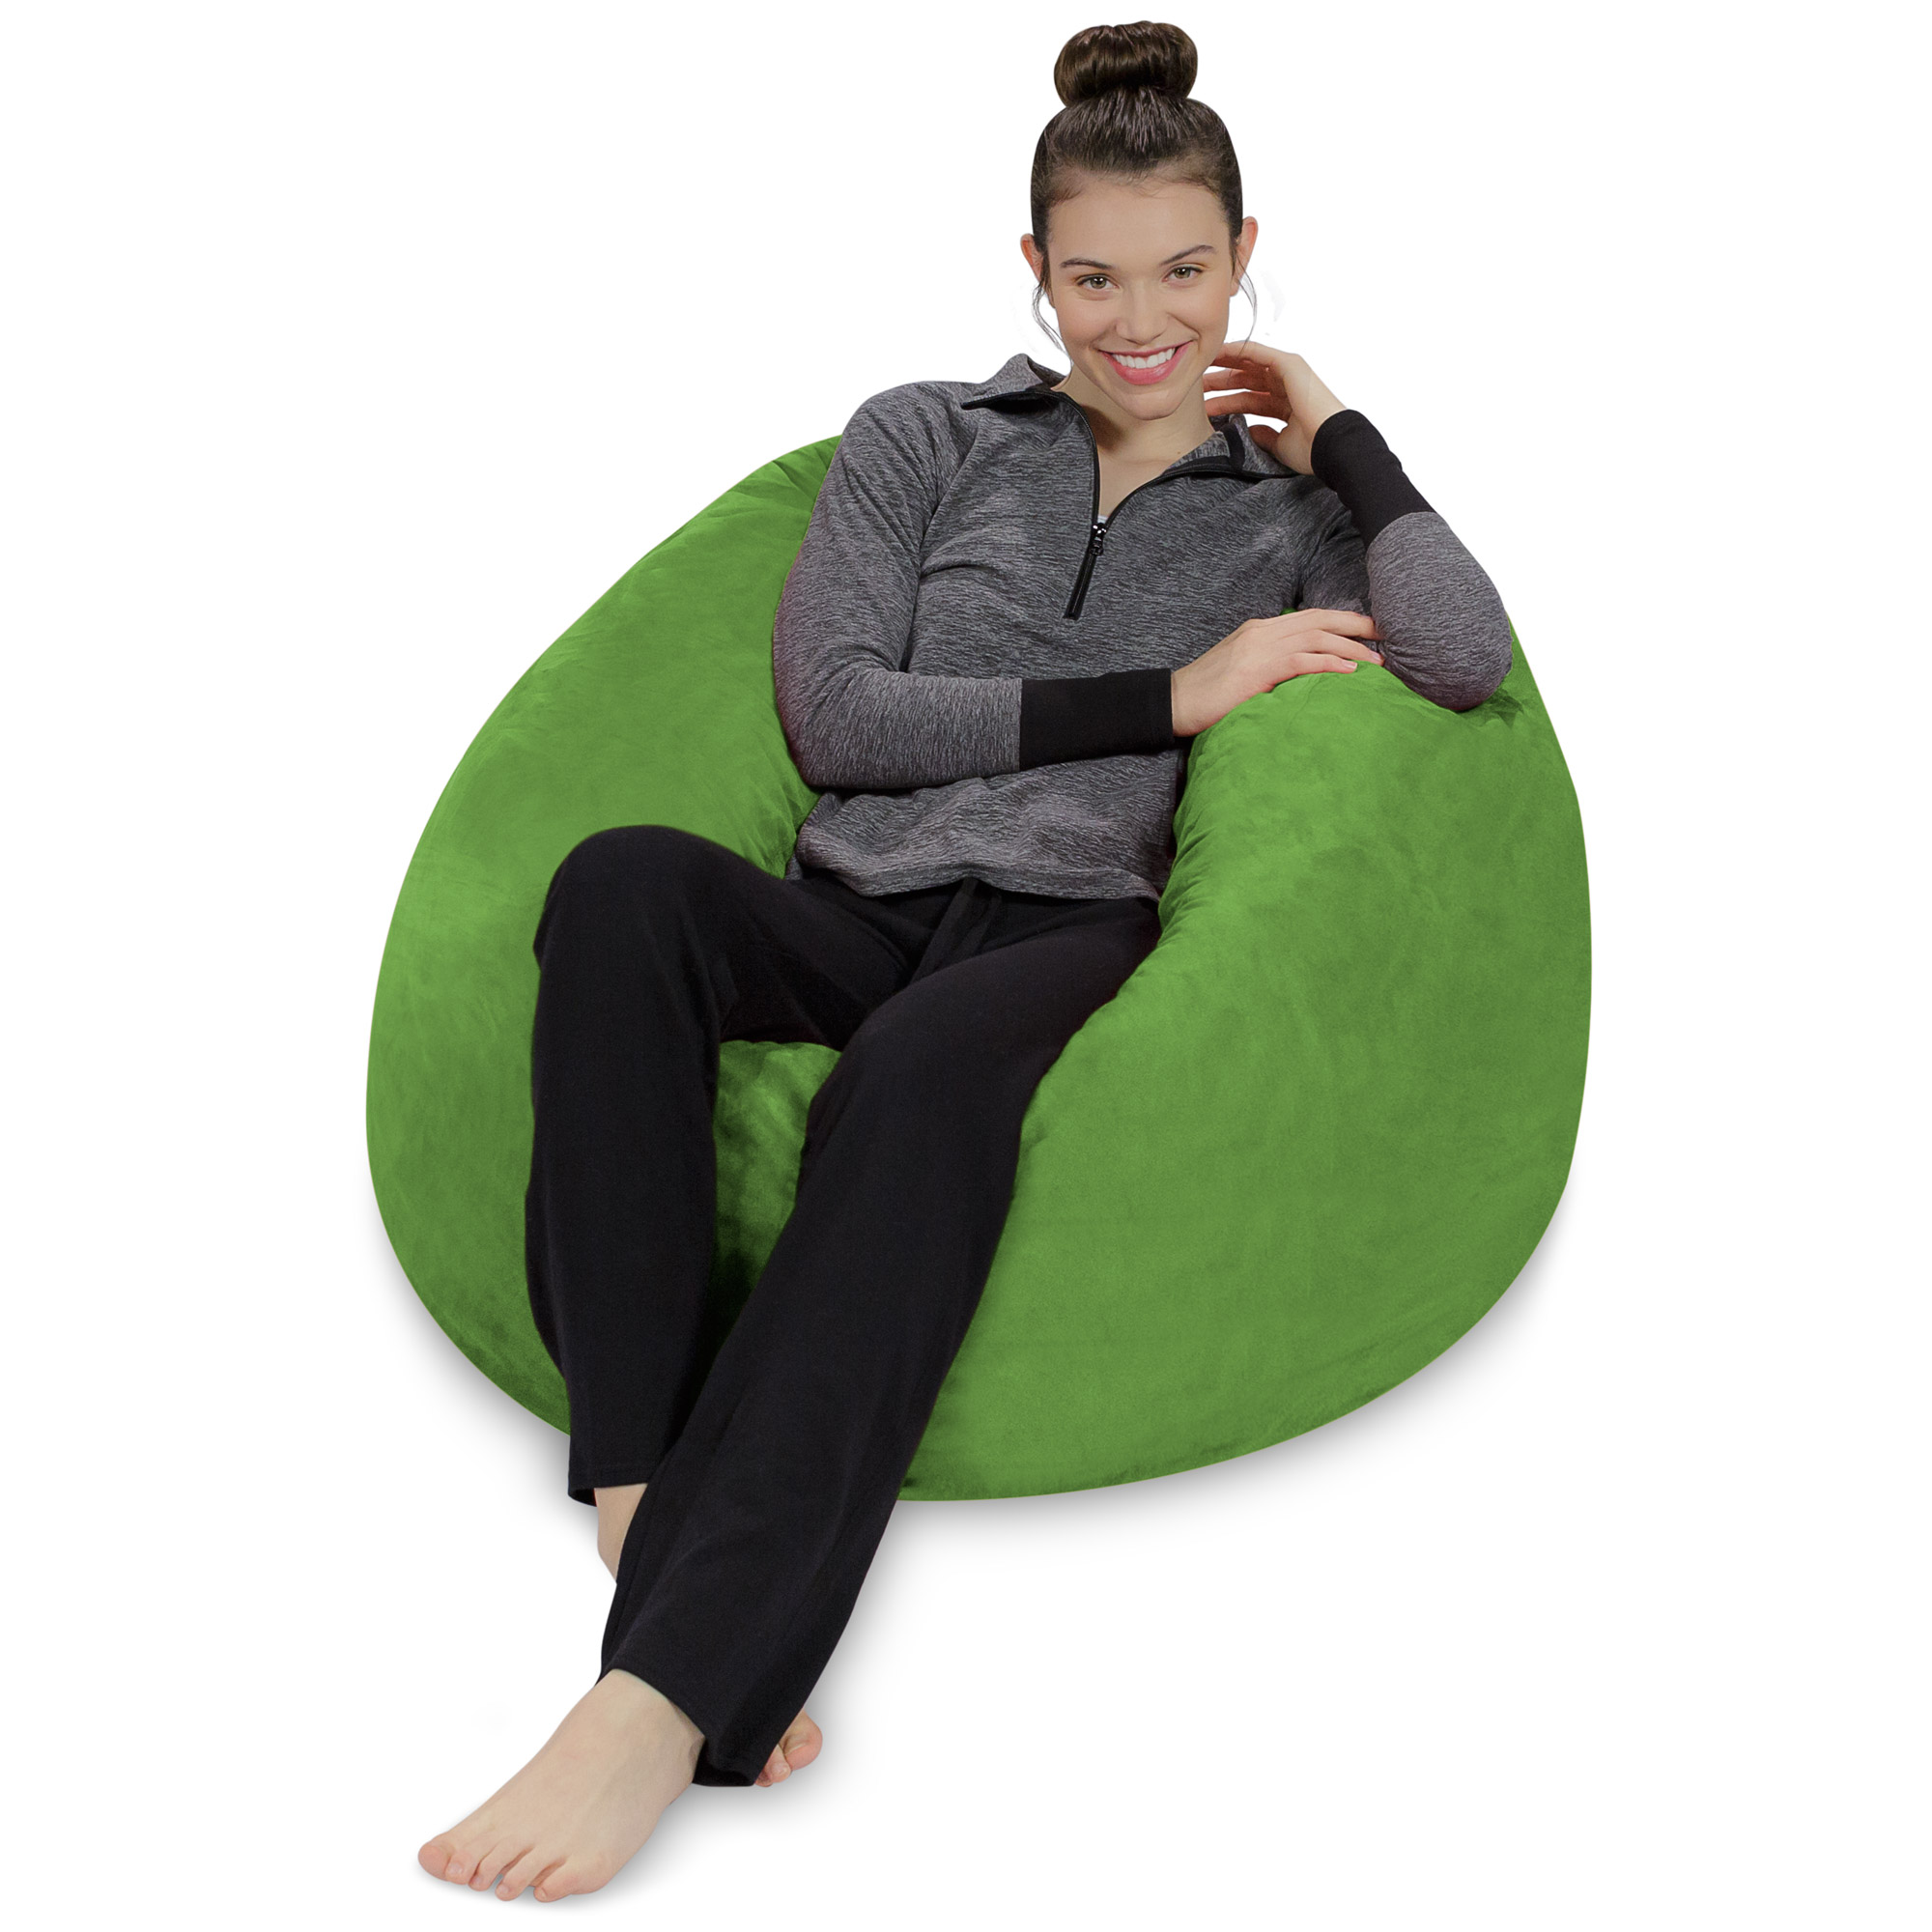 Sofa Sack Bean Bag Chair, Memory Foam Lounger with Microsuede Cover, Kids, 3 ft, Lime - image 5 of 5